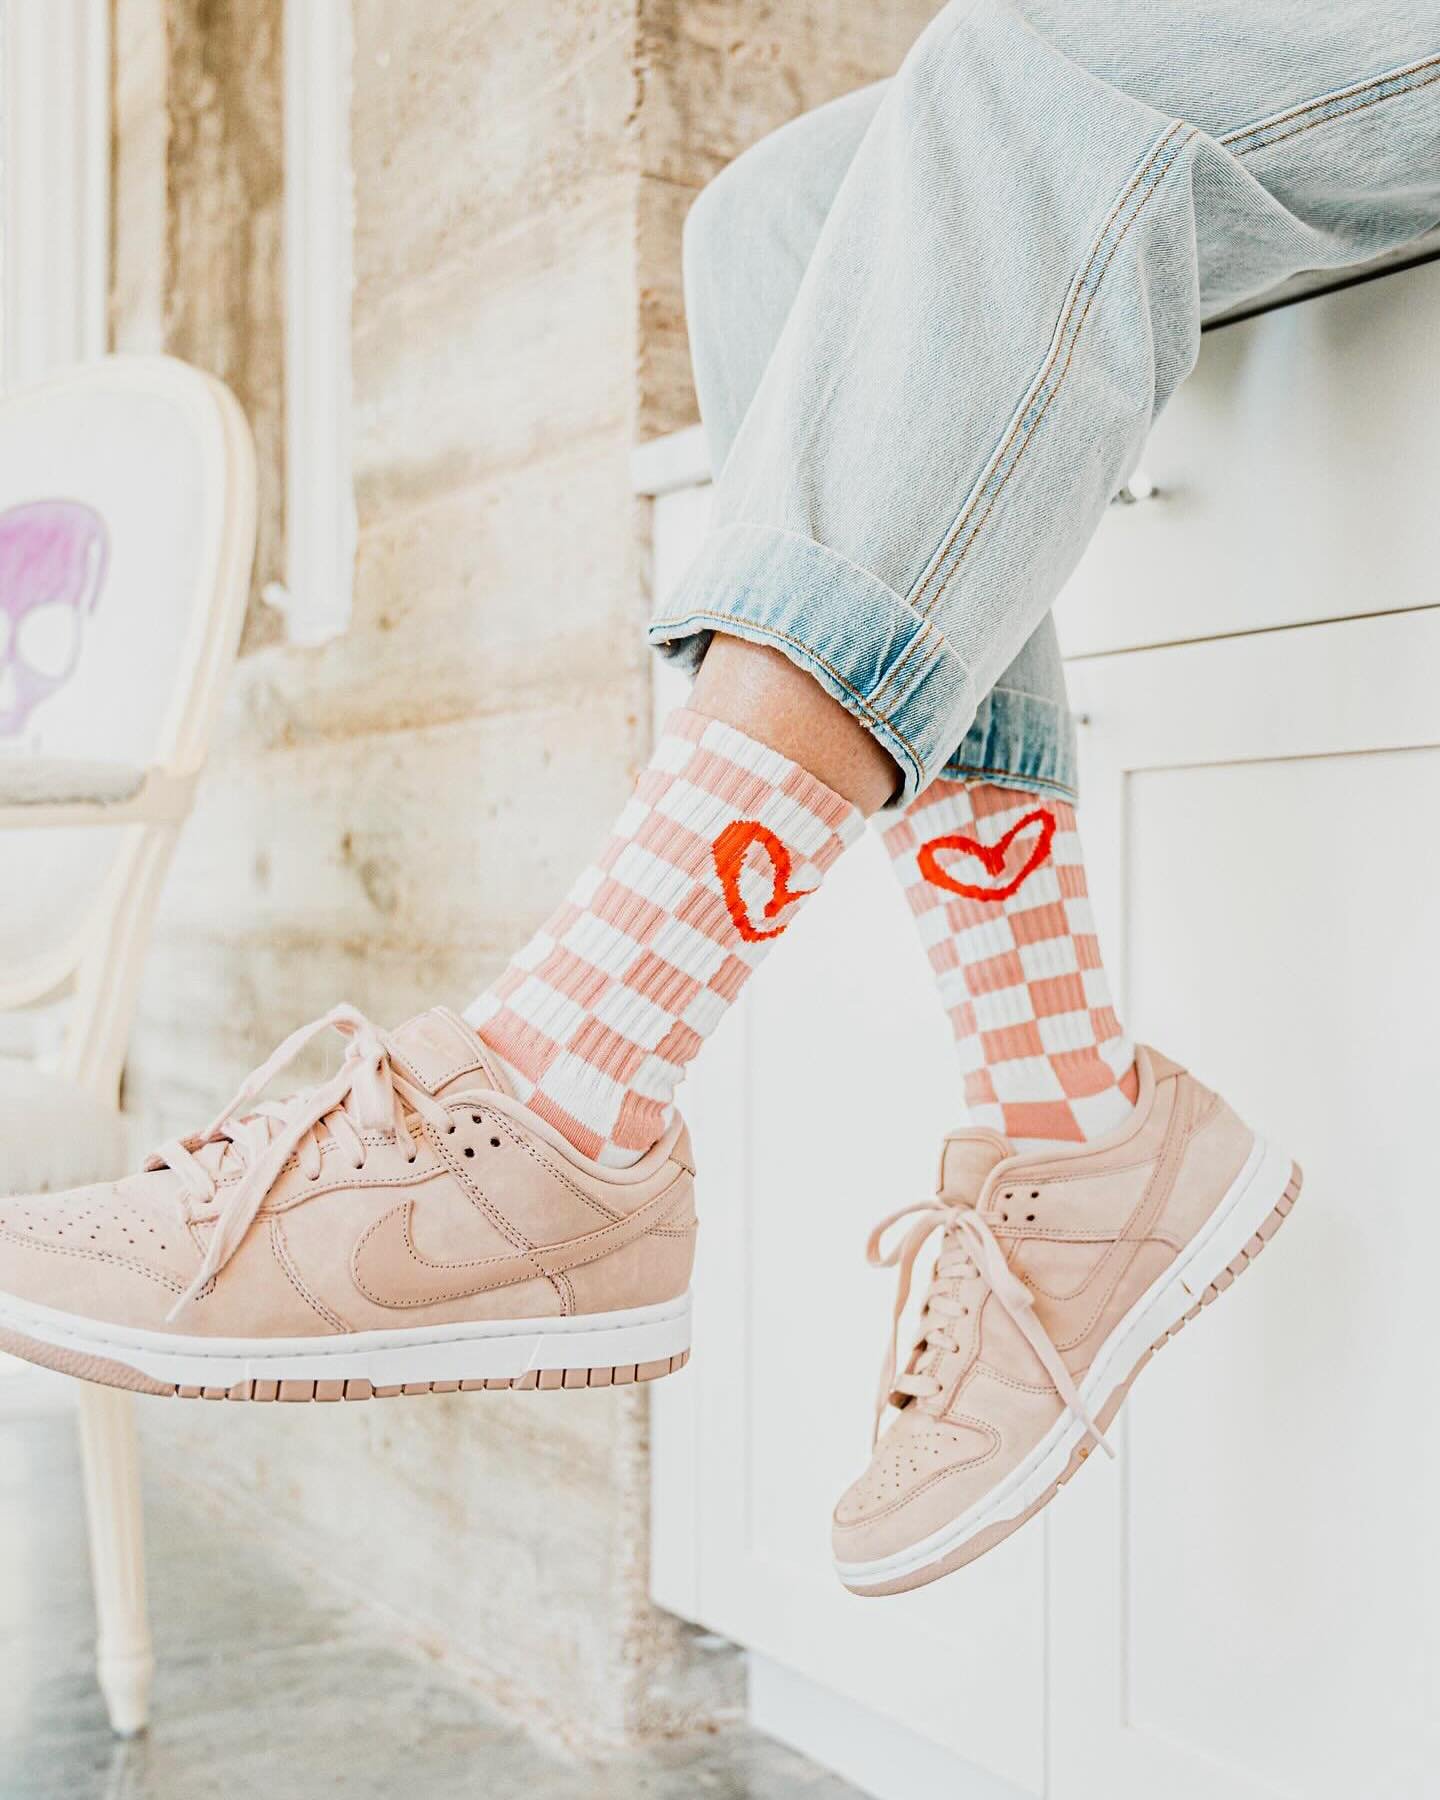 Who doesn&rsquo;t love a fresh pair of socks? 💥

🏁 + 💗 + 🧦.

#livewhatyoulove #liftothersup #lwyl 

$5 from every purchase in April supports @rsrtig 

📸@lauramorsmanphotography